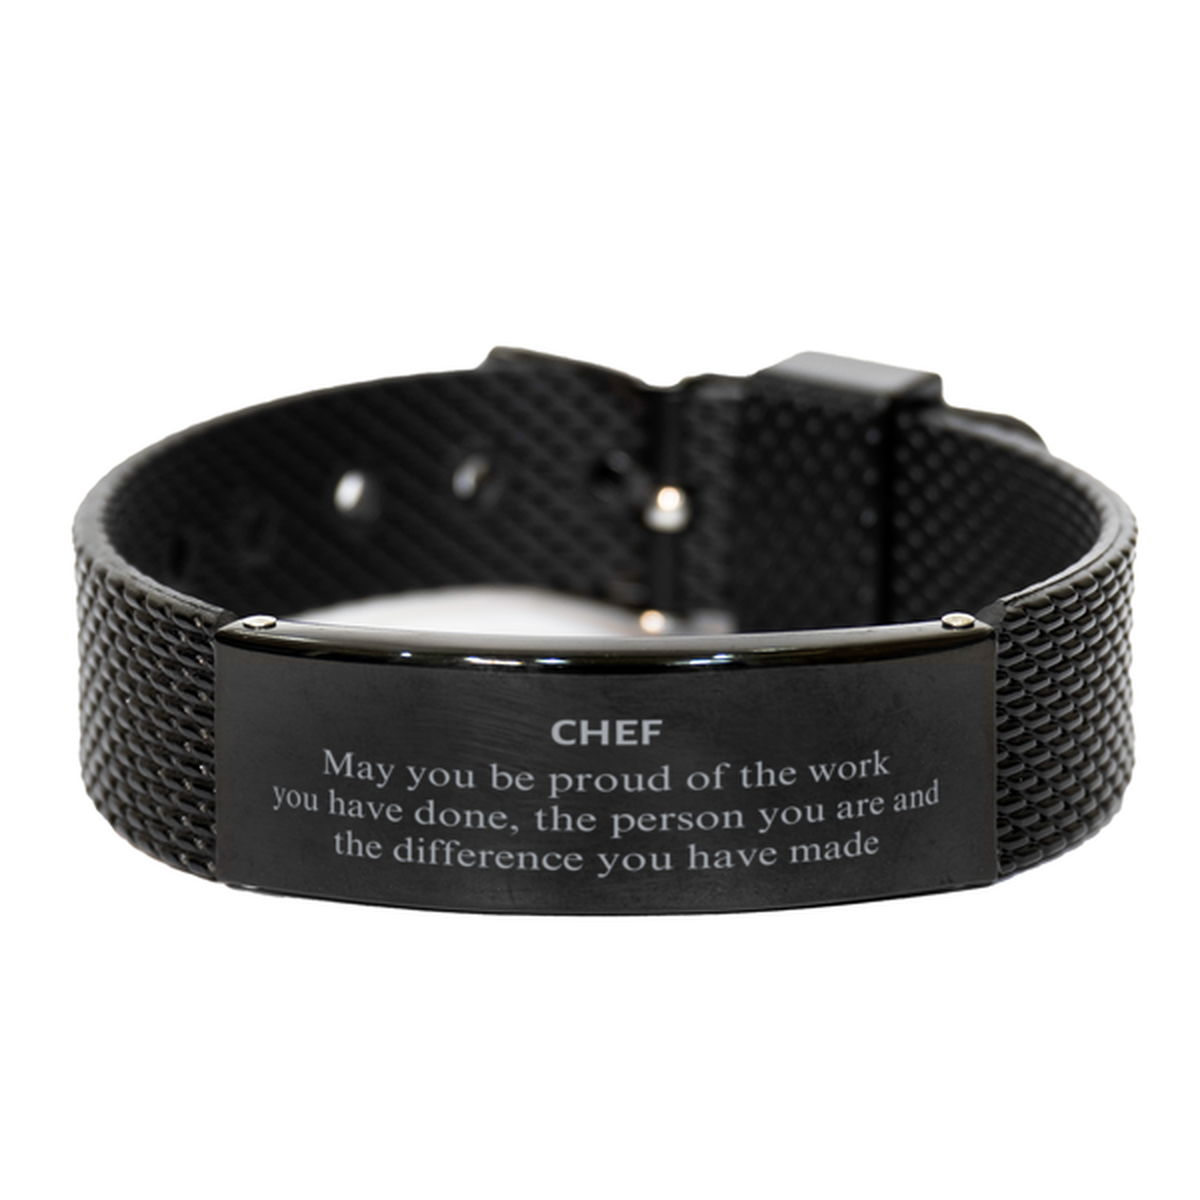 Chef May you be proud of the work you have done, Retirement Chef Black Shark Mesh Bracelet for Colleague Appreciation Gifts Amazing for Chef